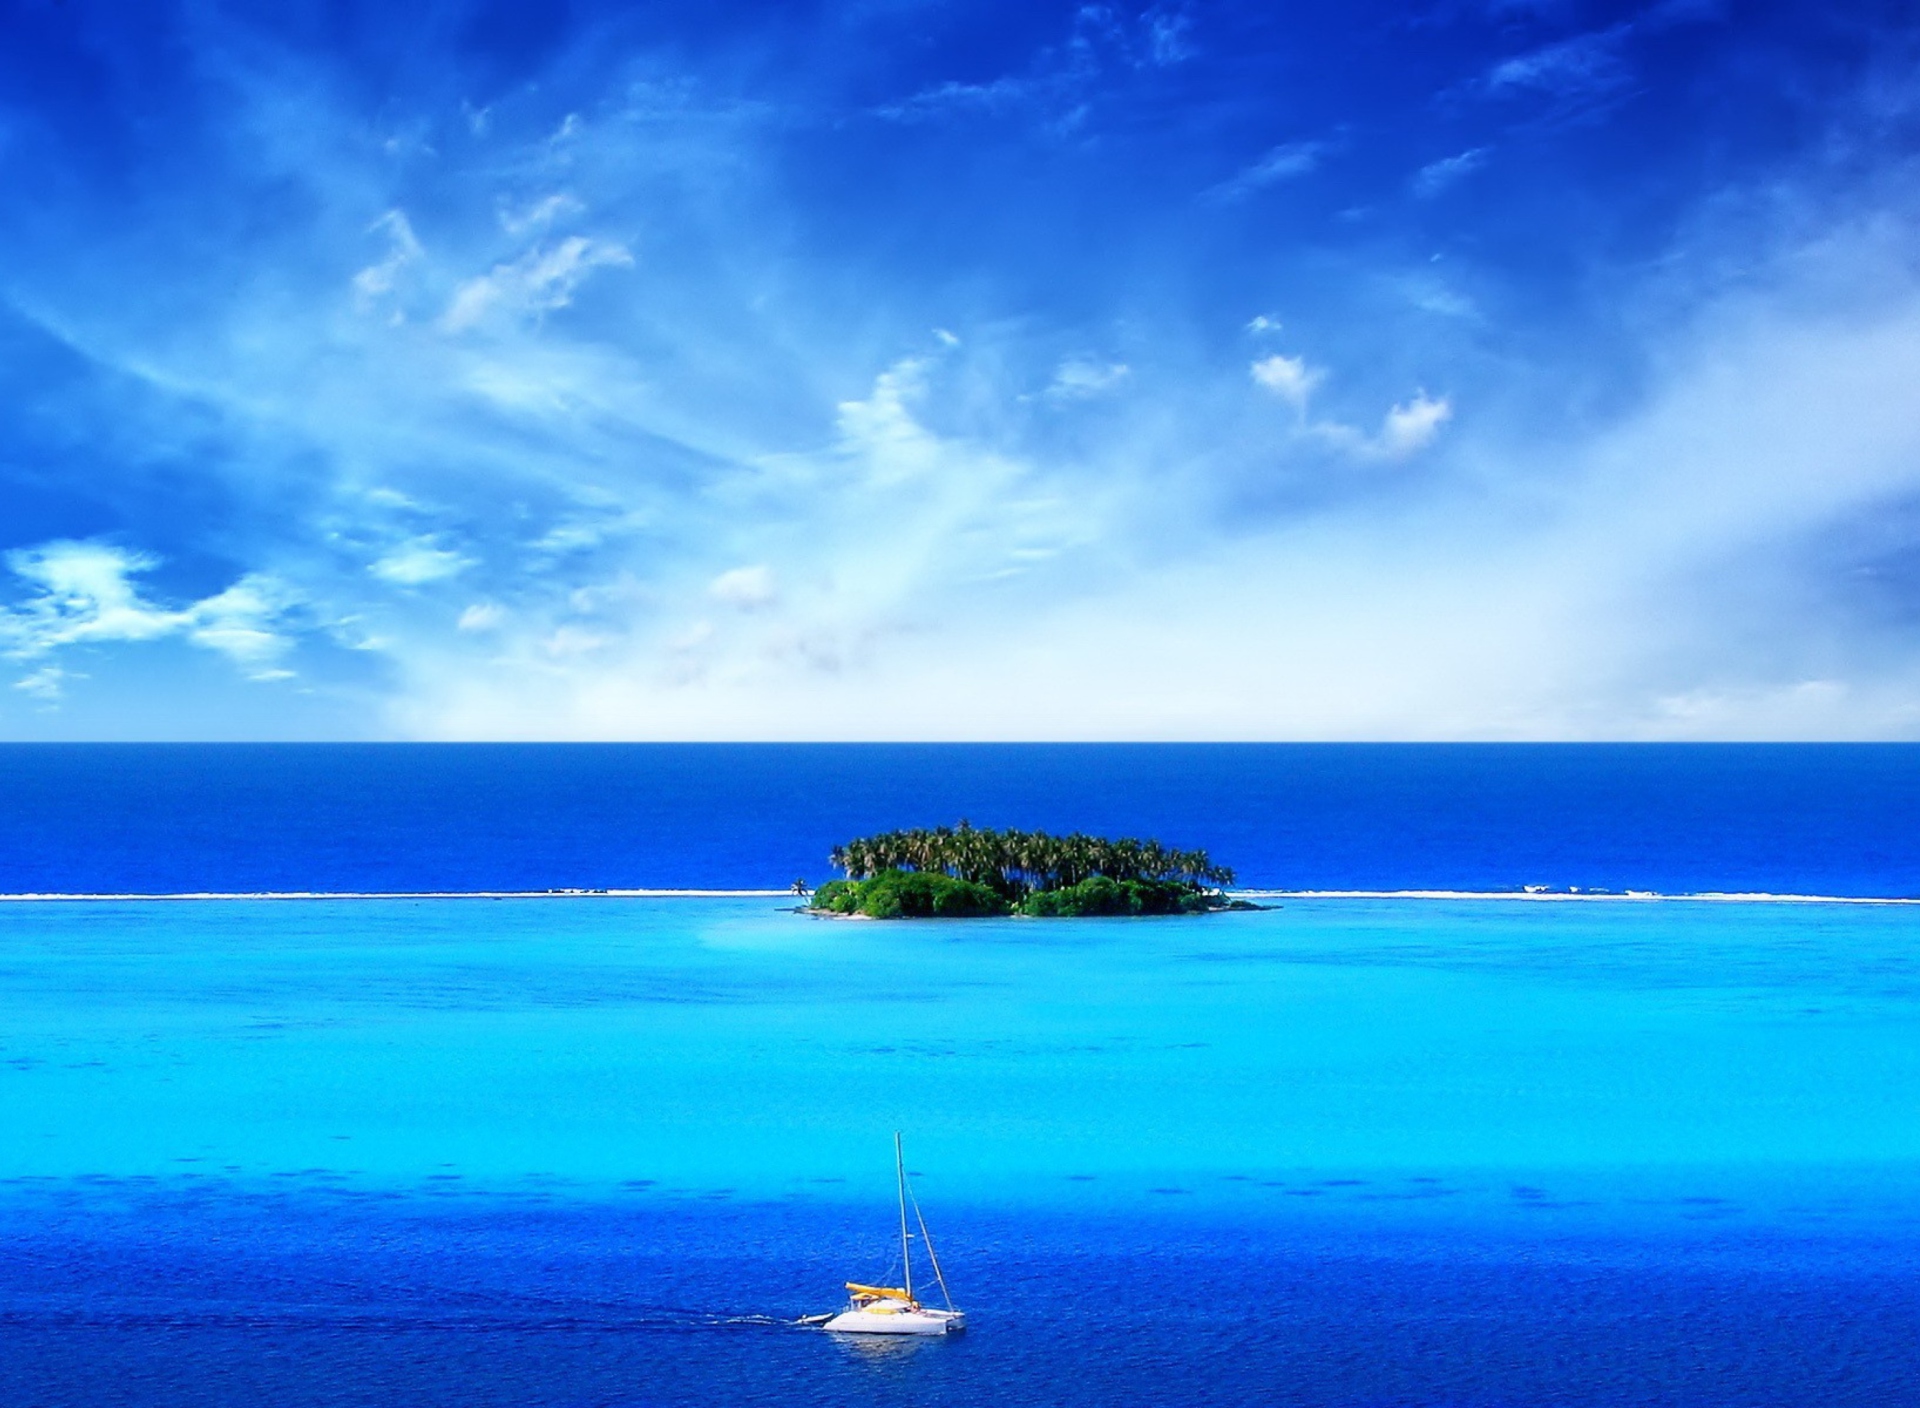 Green Island In Middle Of Blue Ocean And White Boat wallpaper 1920x1408